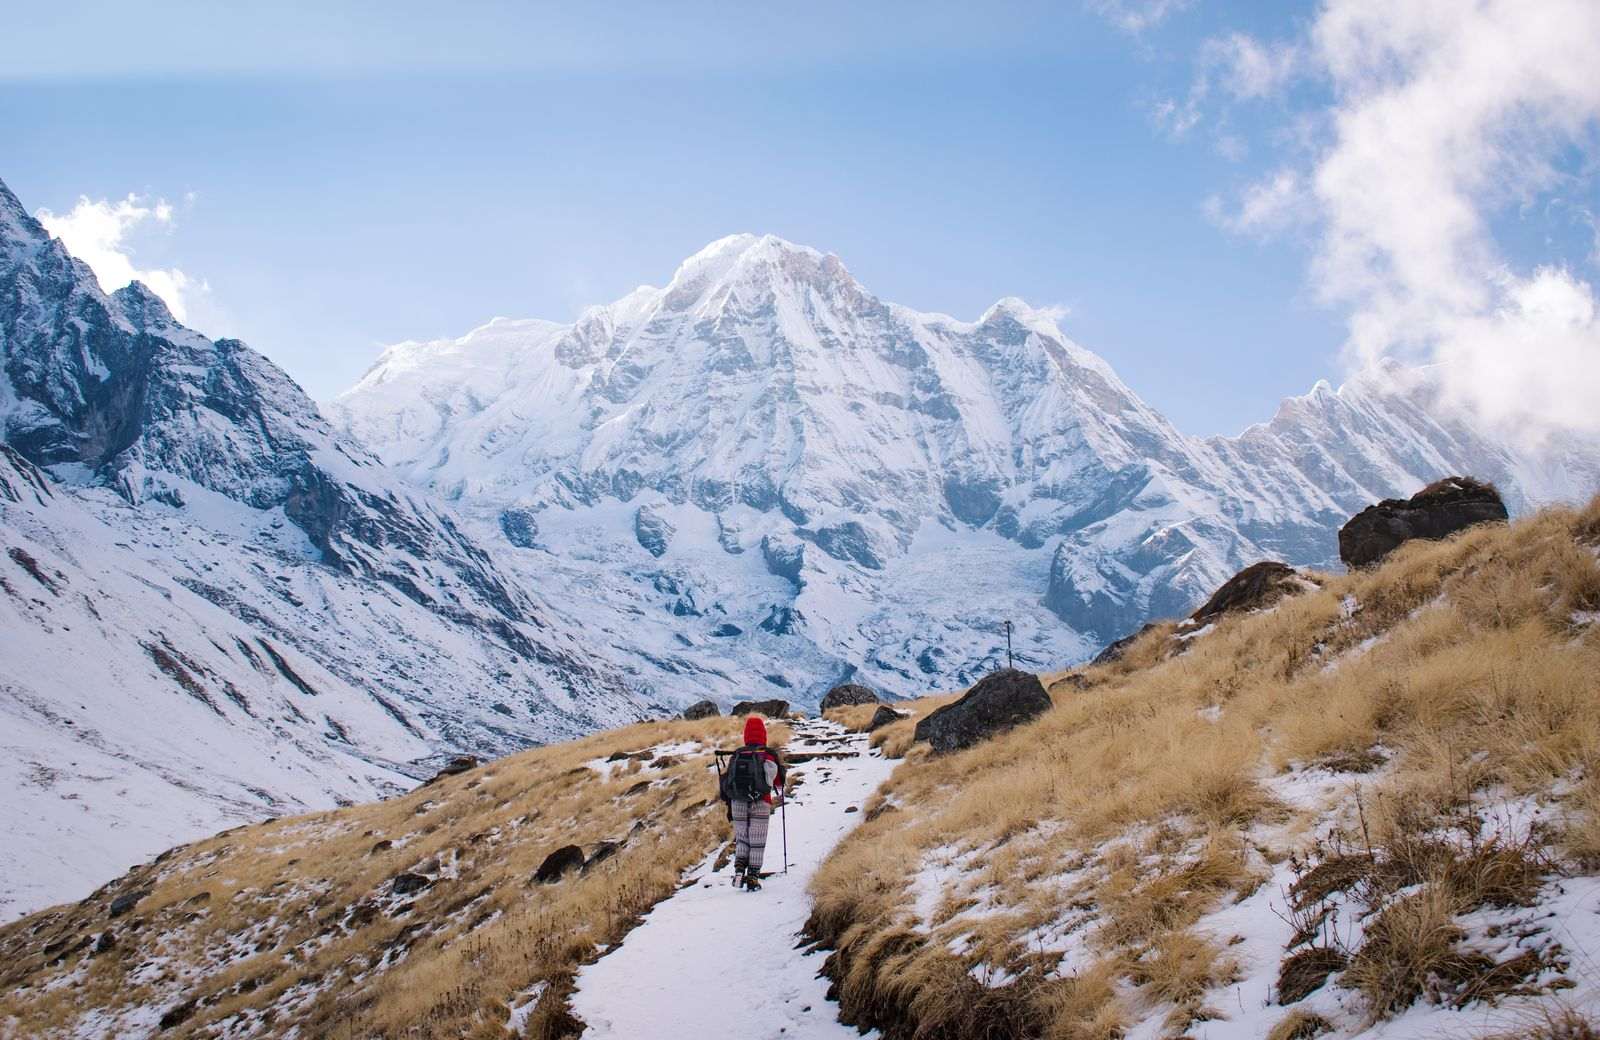 6 Day Itinerary for the Annapurna Base Camp Trek Without a Guide